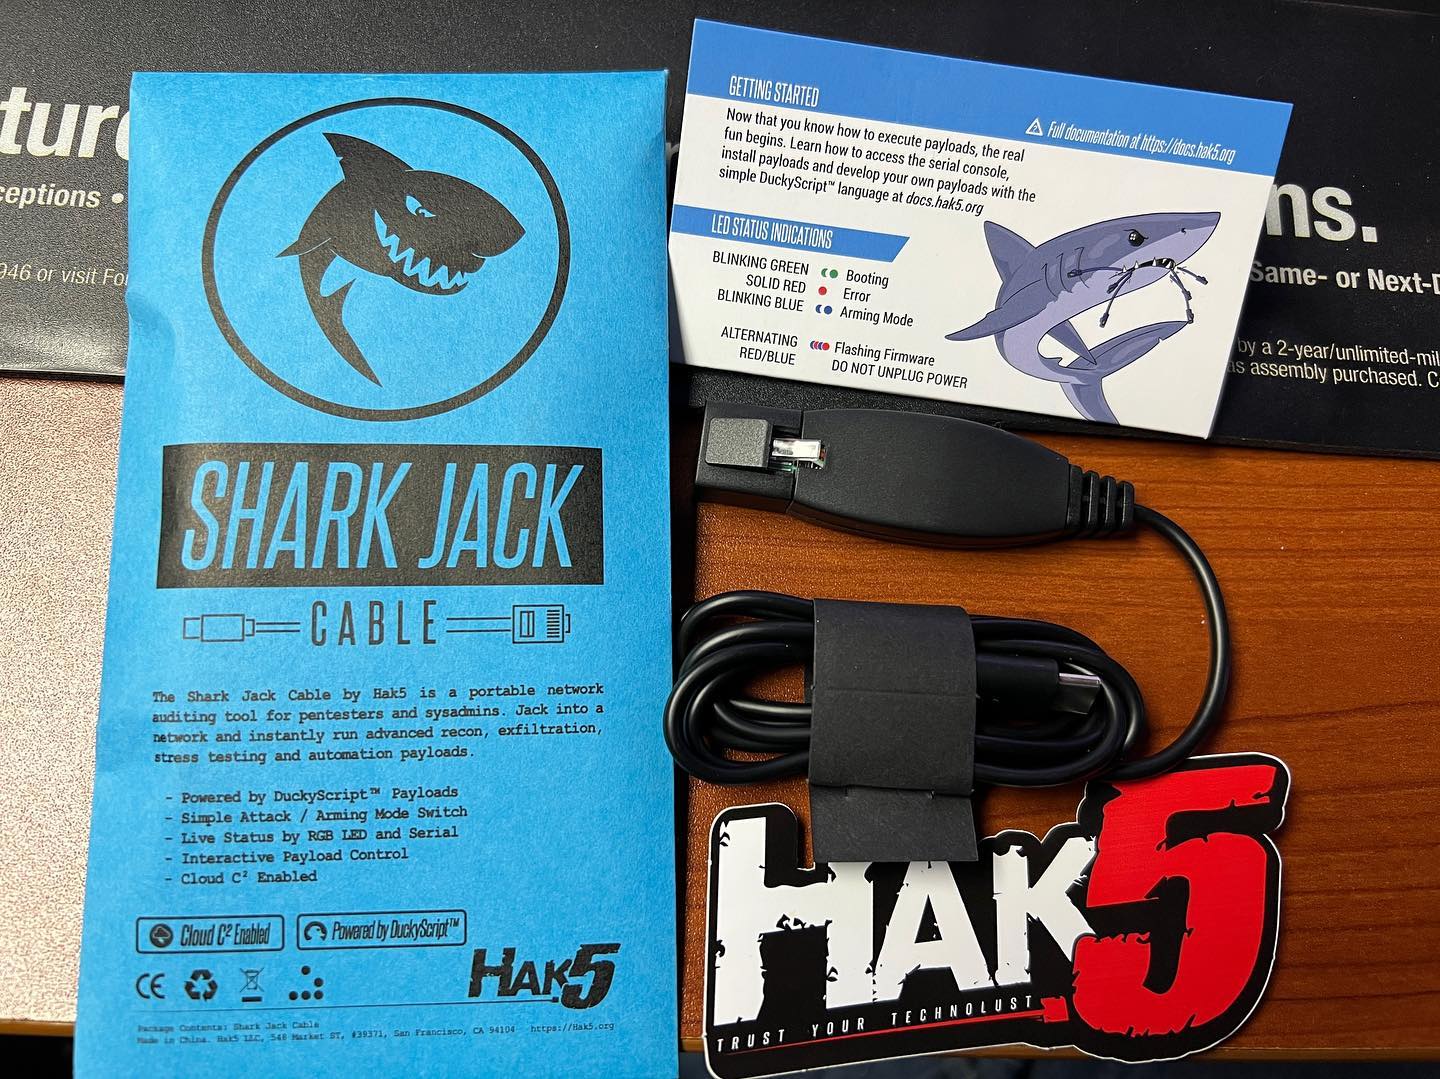 Picked up a cabled Shark Jack from @hak5 to play with. Can’t wait to test it out. #achsysadmin #sharkjack #hak5 #pentest #pentesttools #cybersecurity #achubbard